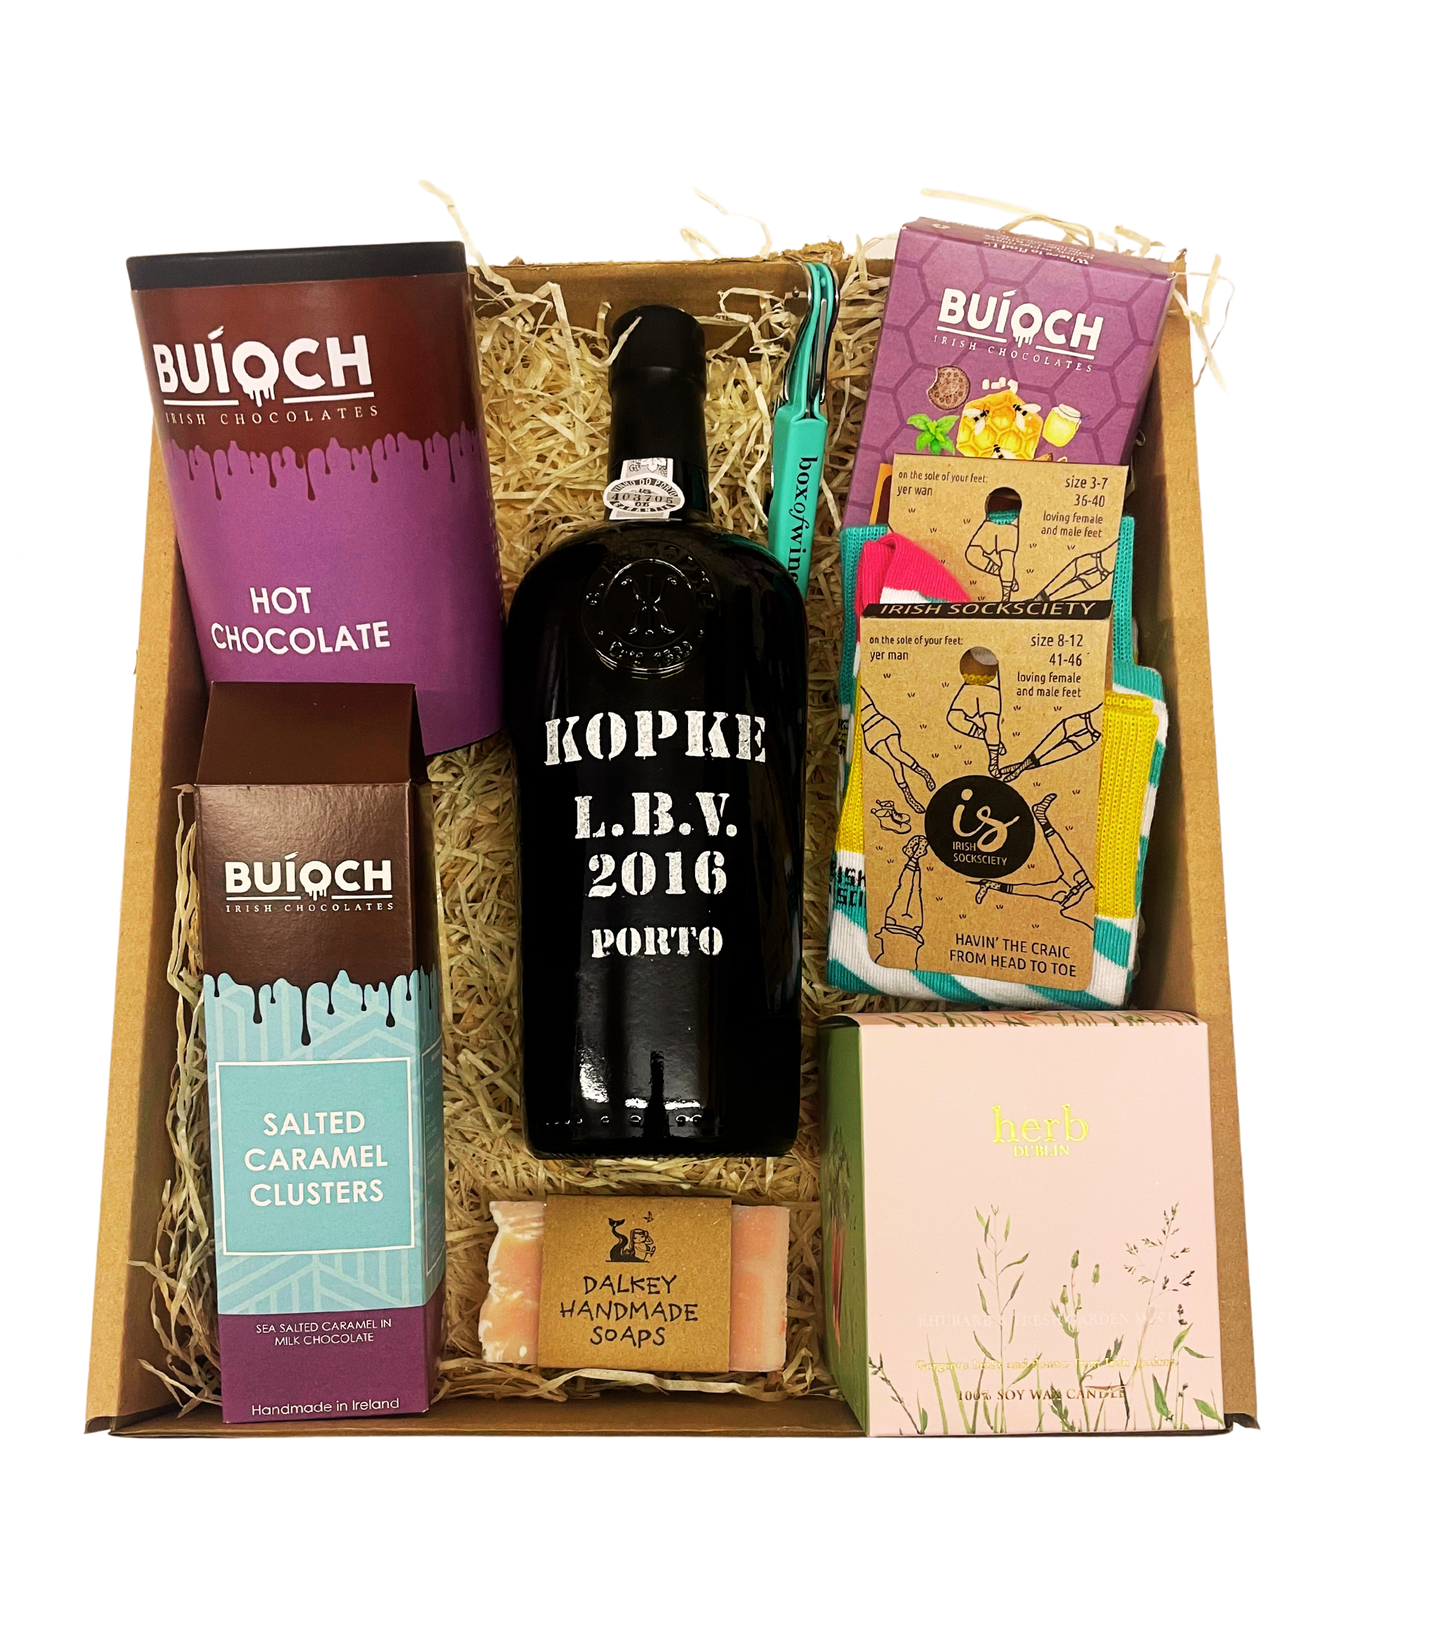 The Couples Christmas Hamper